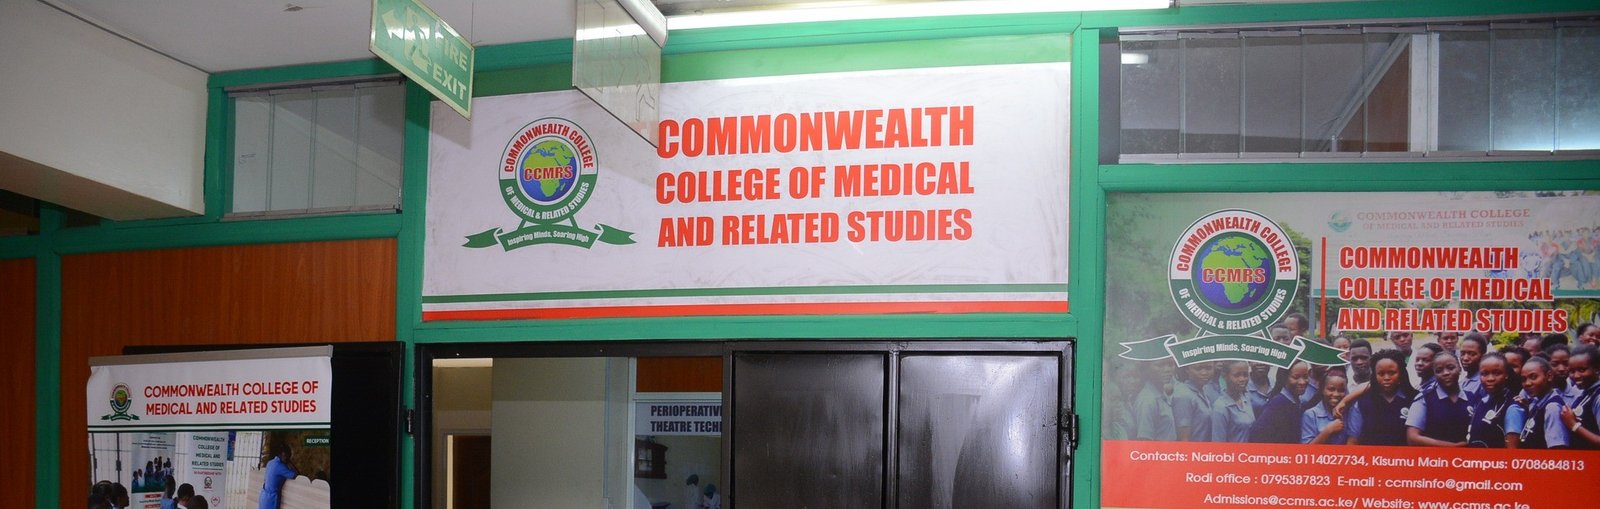 Commonwealth College of Medical & Related Studies